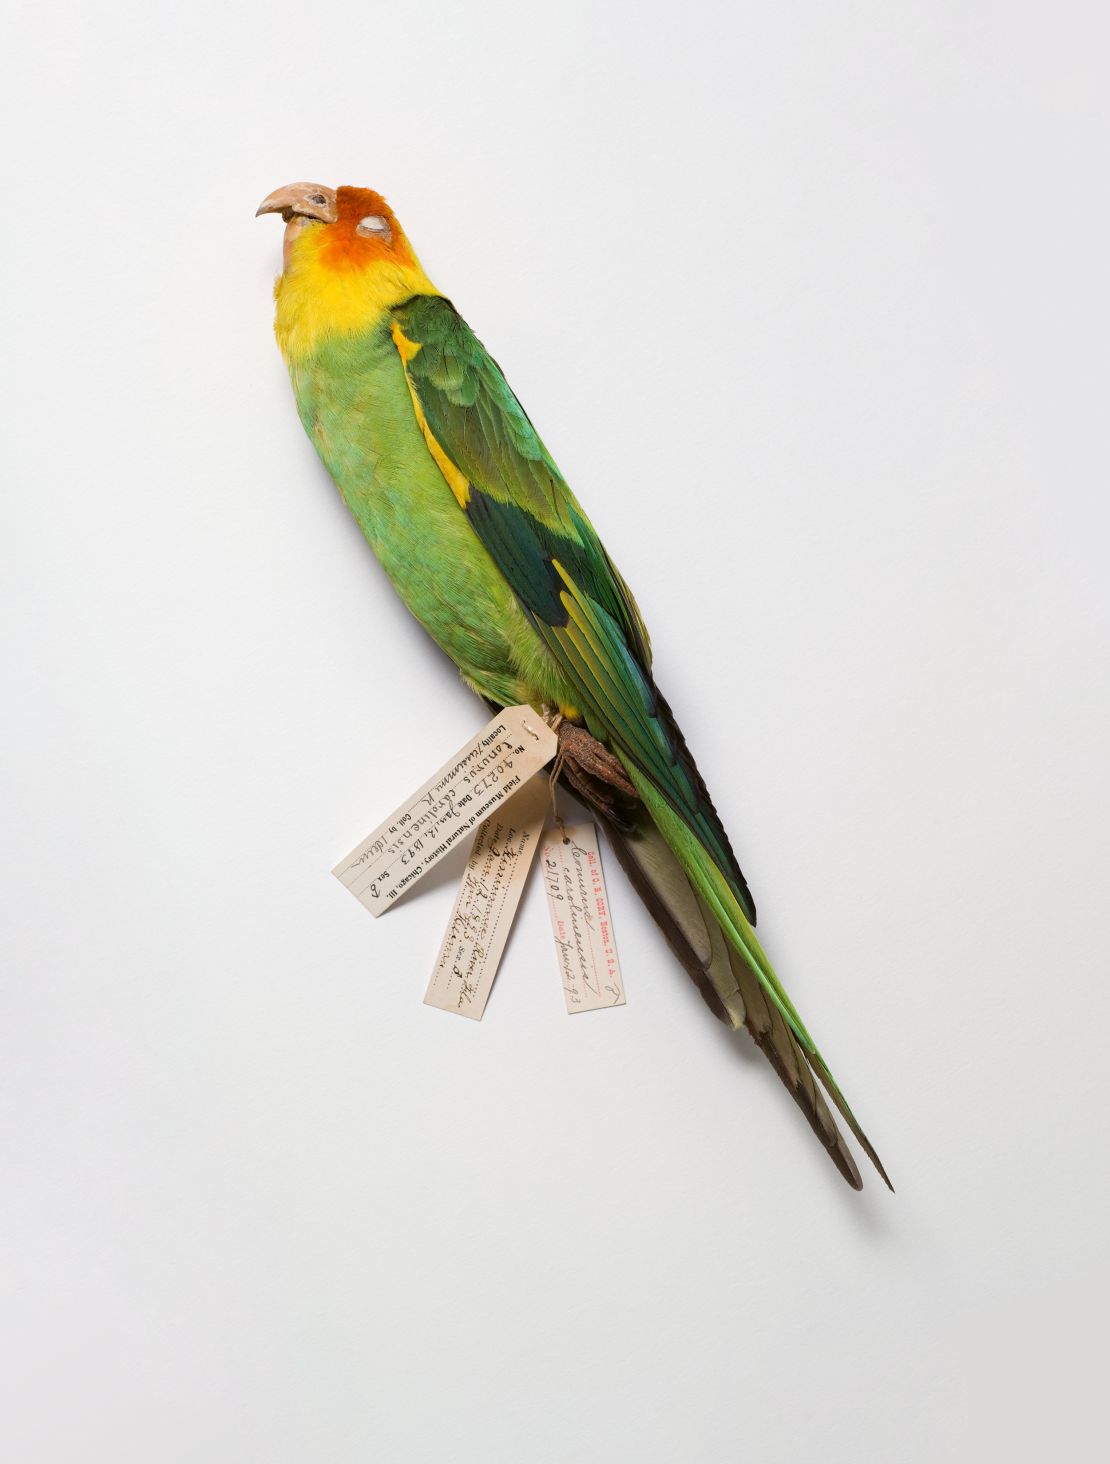 Pictured is a Field Museum specimen of a Carolina parakeet, an extinct species once coveted for its colorful feathers and wiped out by disease.